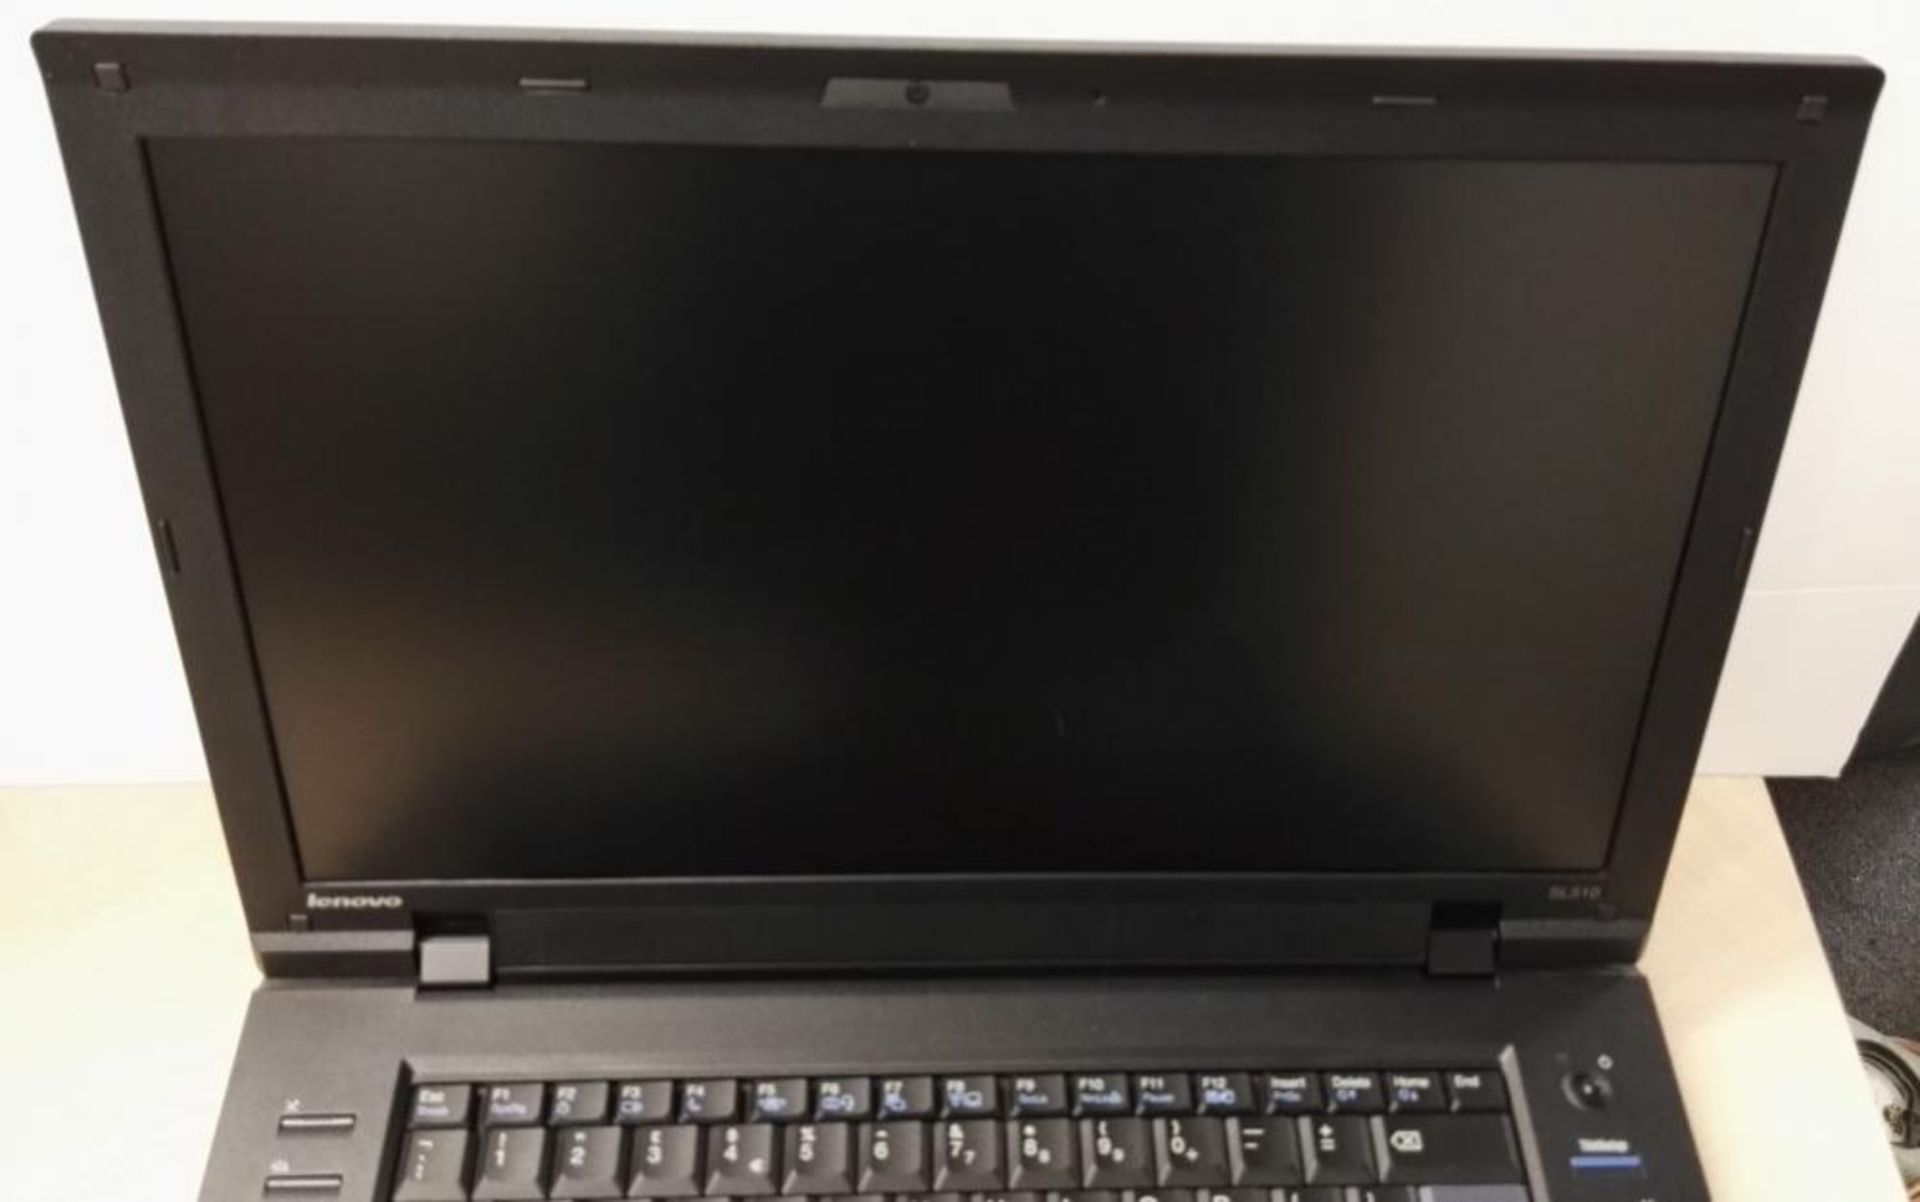 1 x Lenovo Thinkpad SL510 Laptop Computer - Features a 15.6 Inch Screen, Intel Core 2 Duo T6670 2.2g - Image 4 of 9